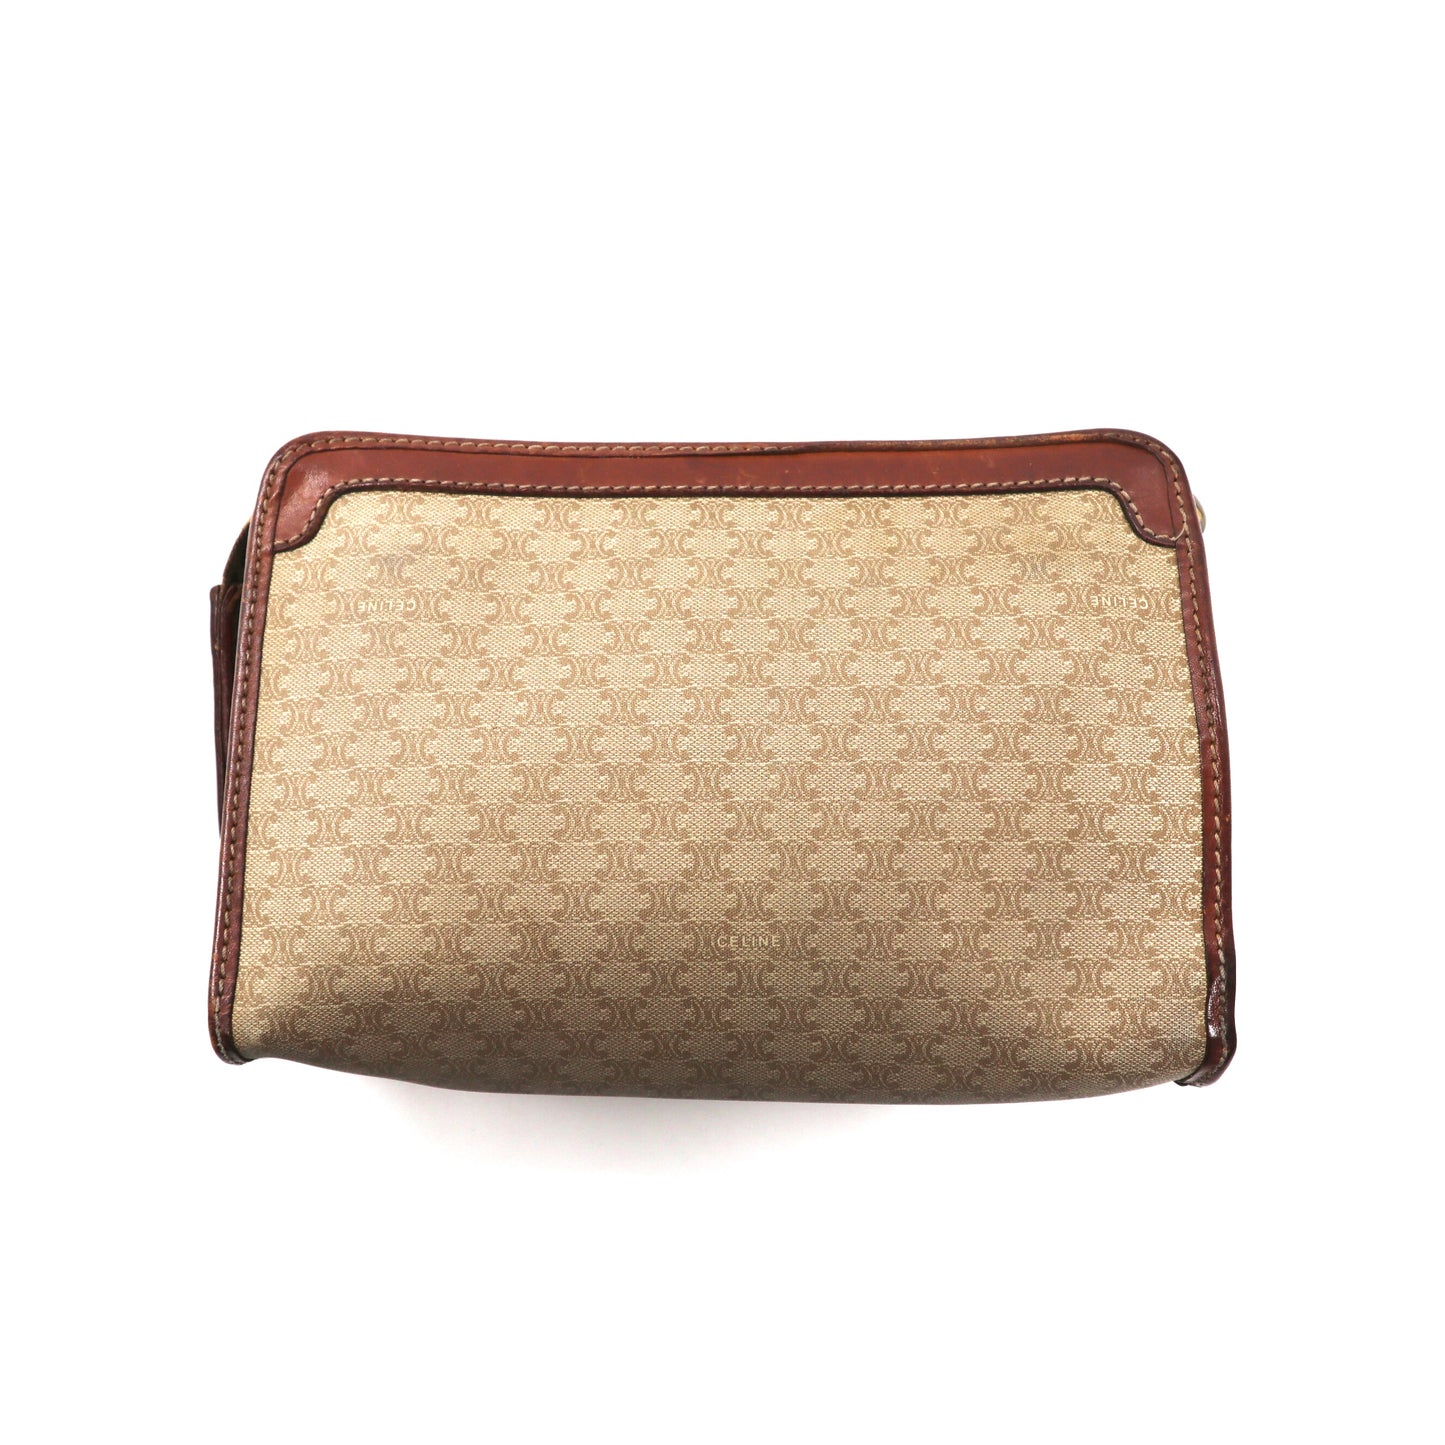 CELINE Clutch Bag Beige Leather Macadam Pattern M06 Made in Italy ...